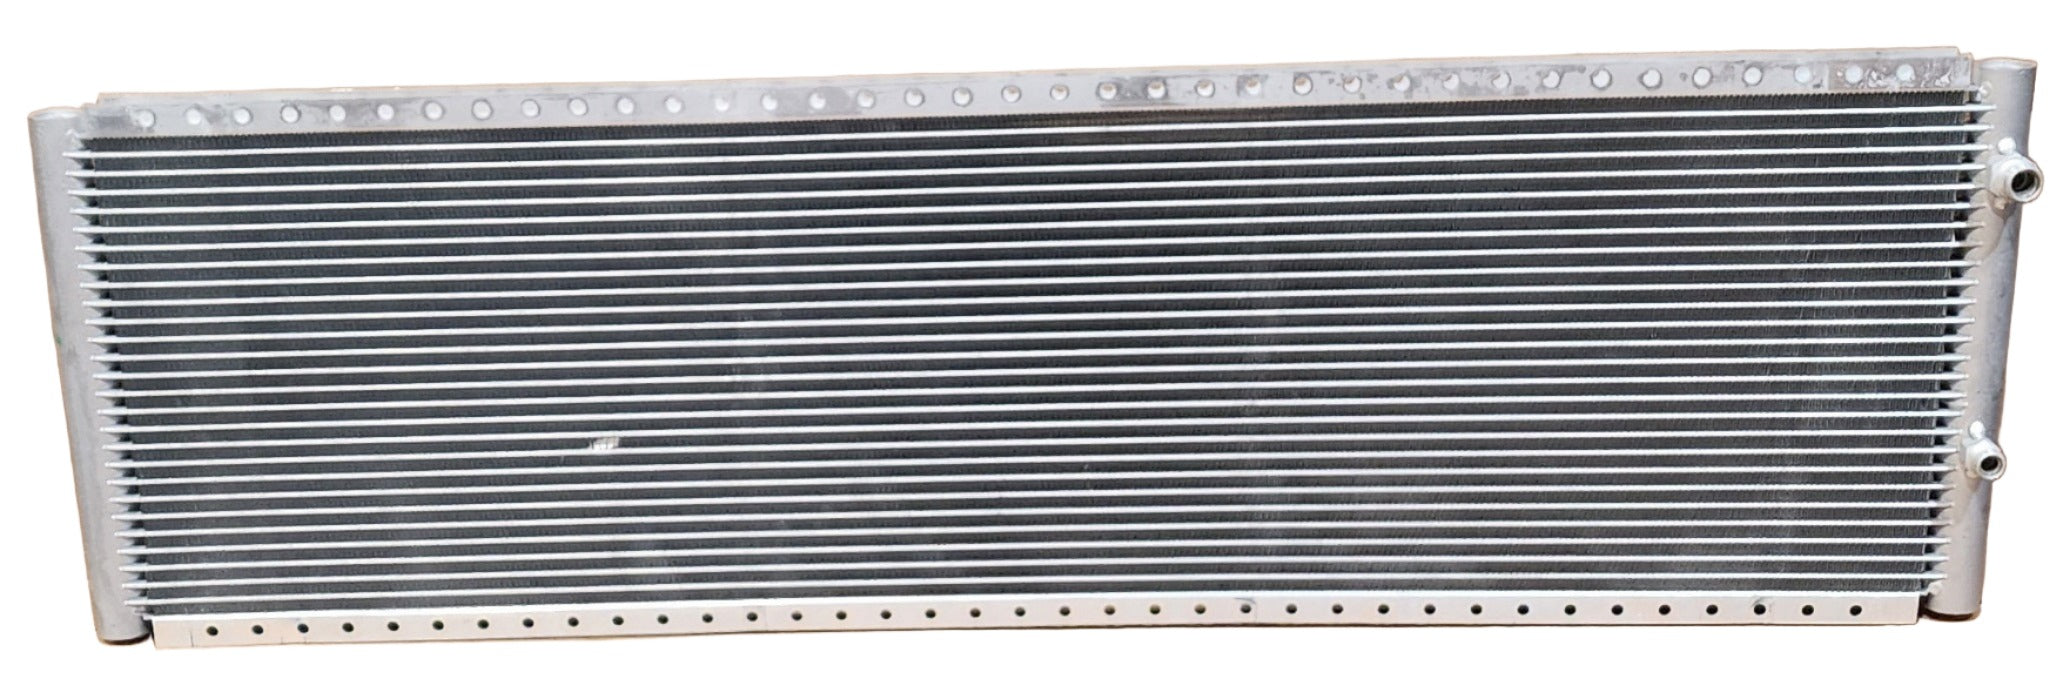 AC Condenser Coil Core for John Deere AT493615 RD-5-15673-0P